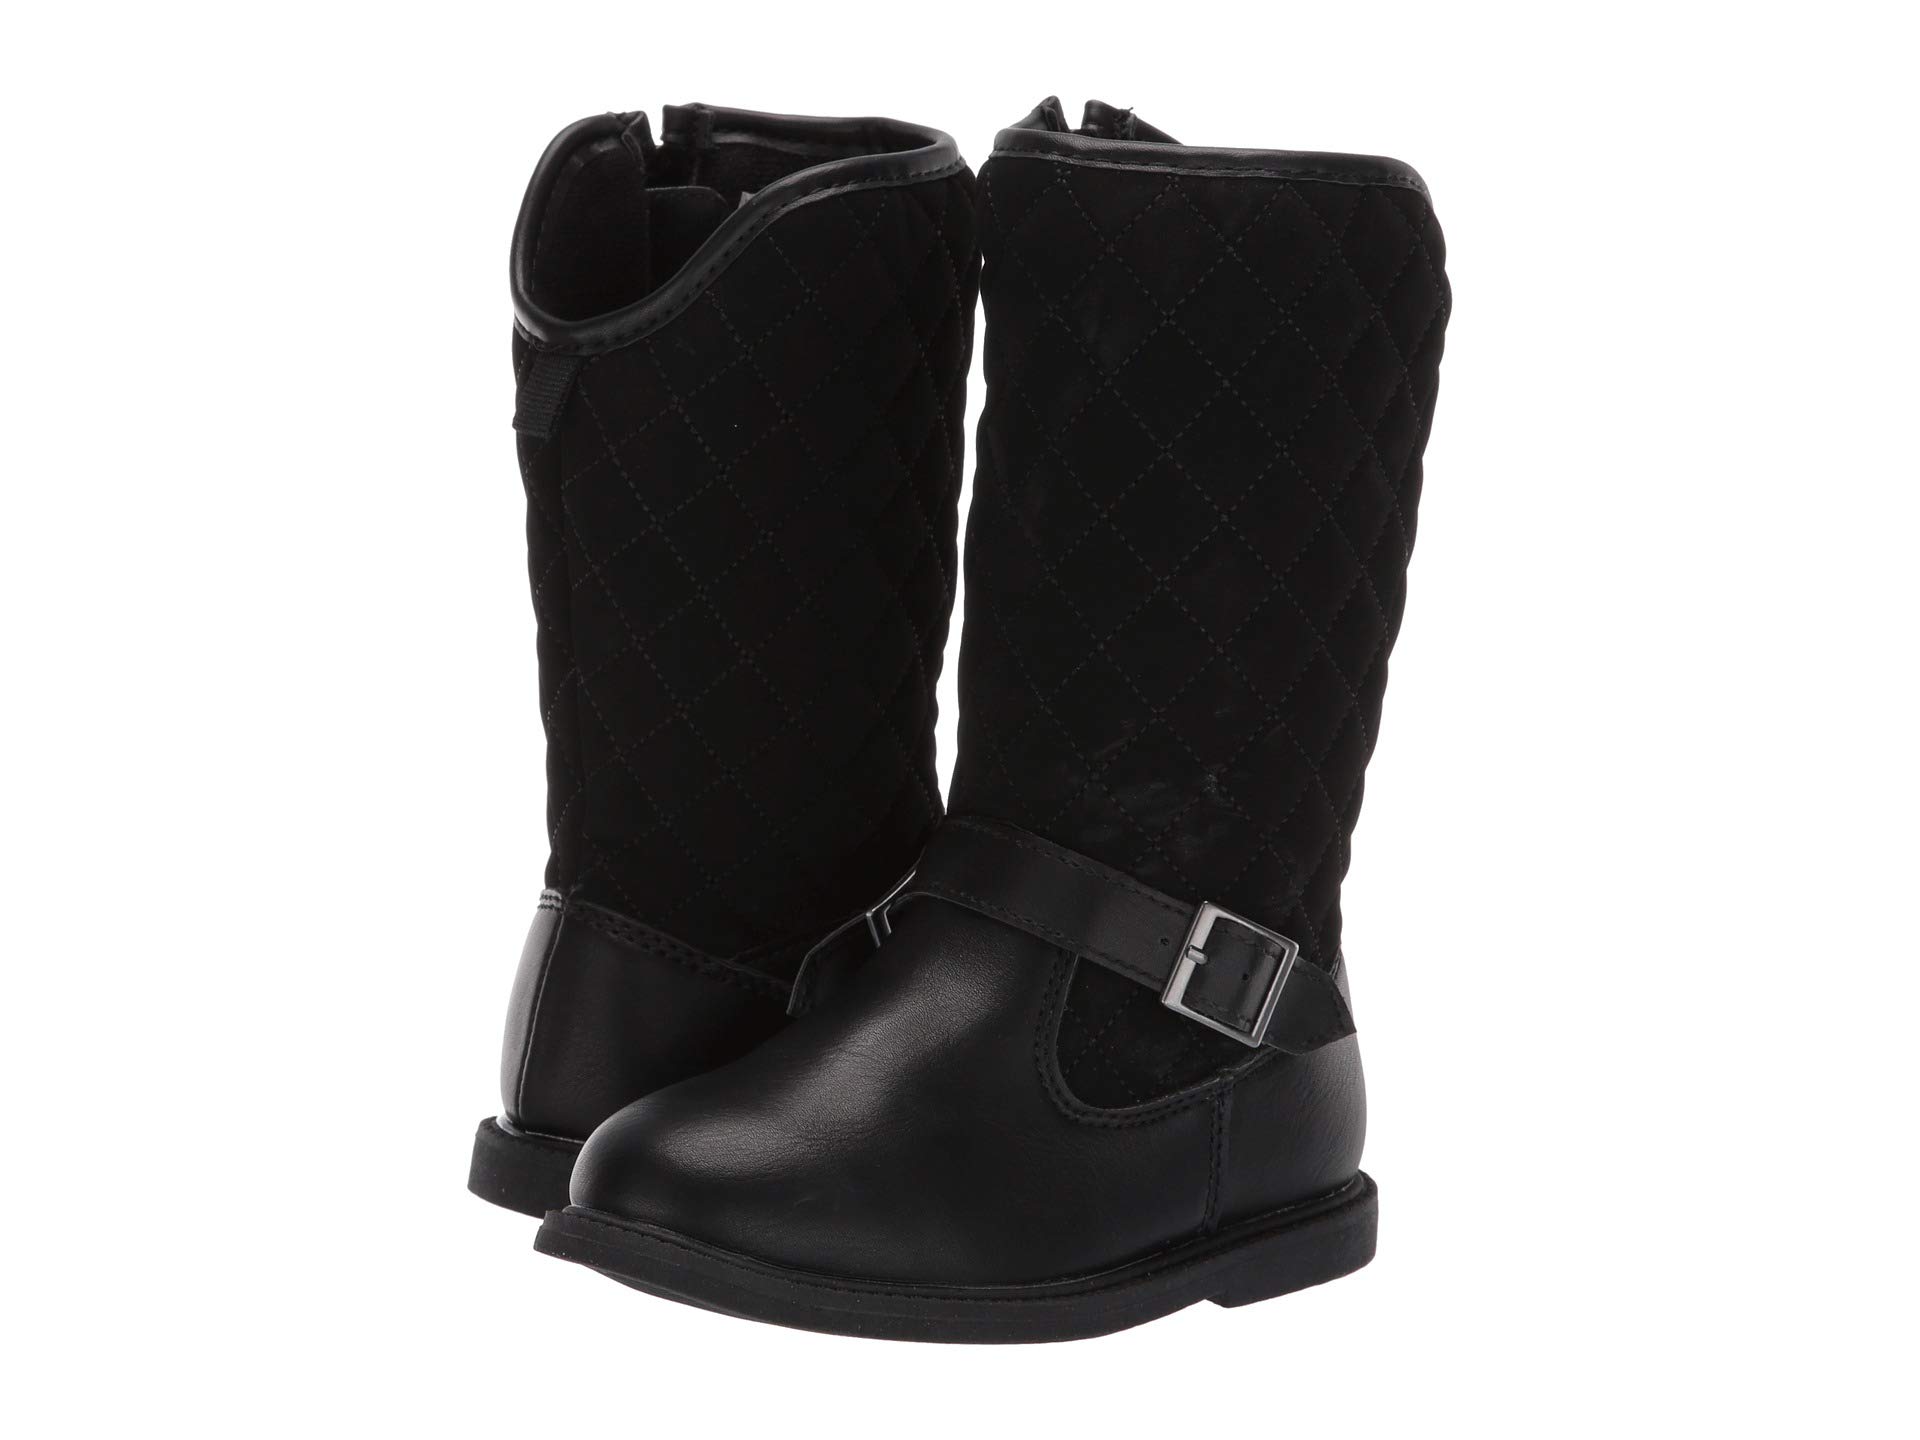 Claress Fashion Boot (Малыш / Малыш) Carter's